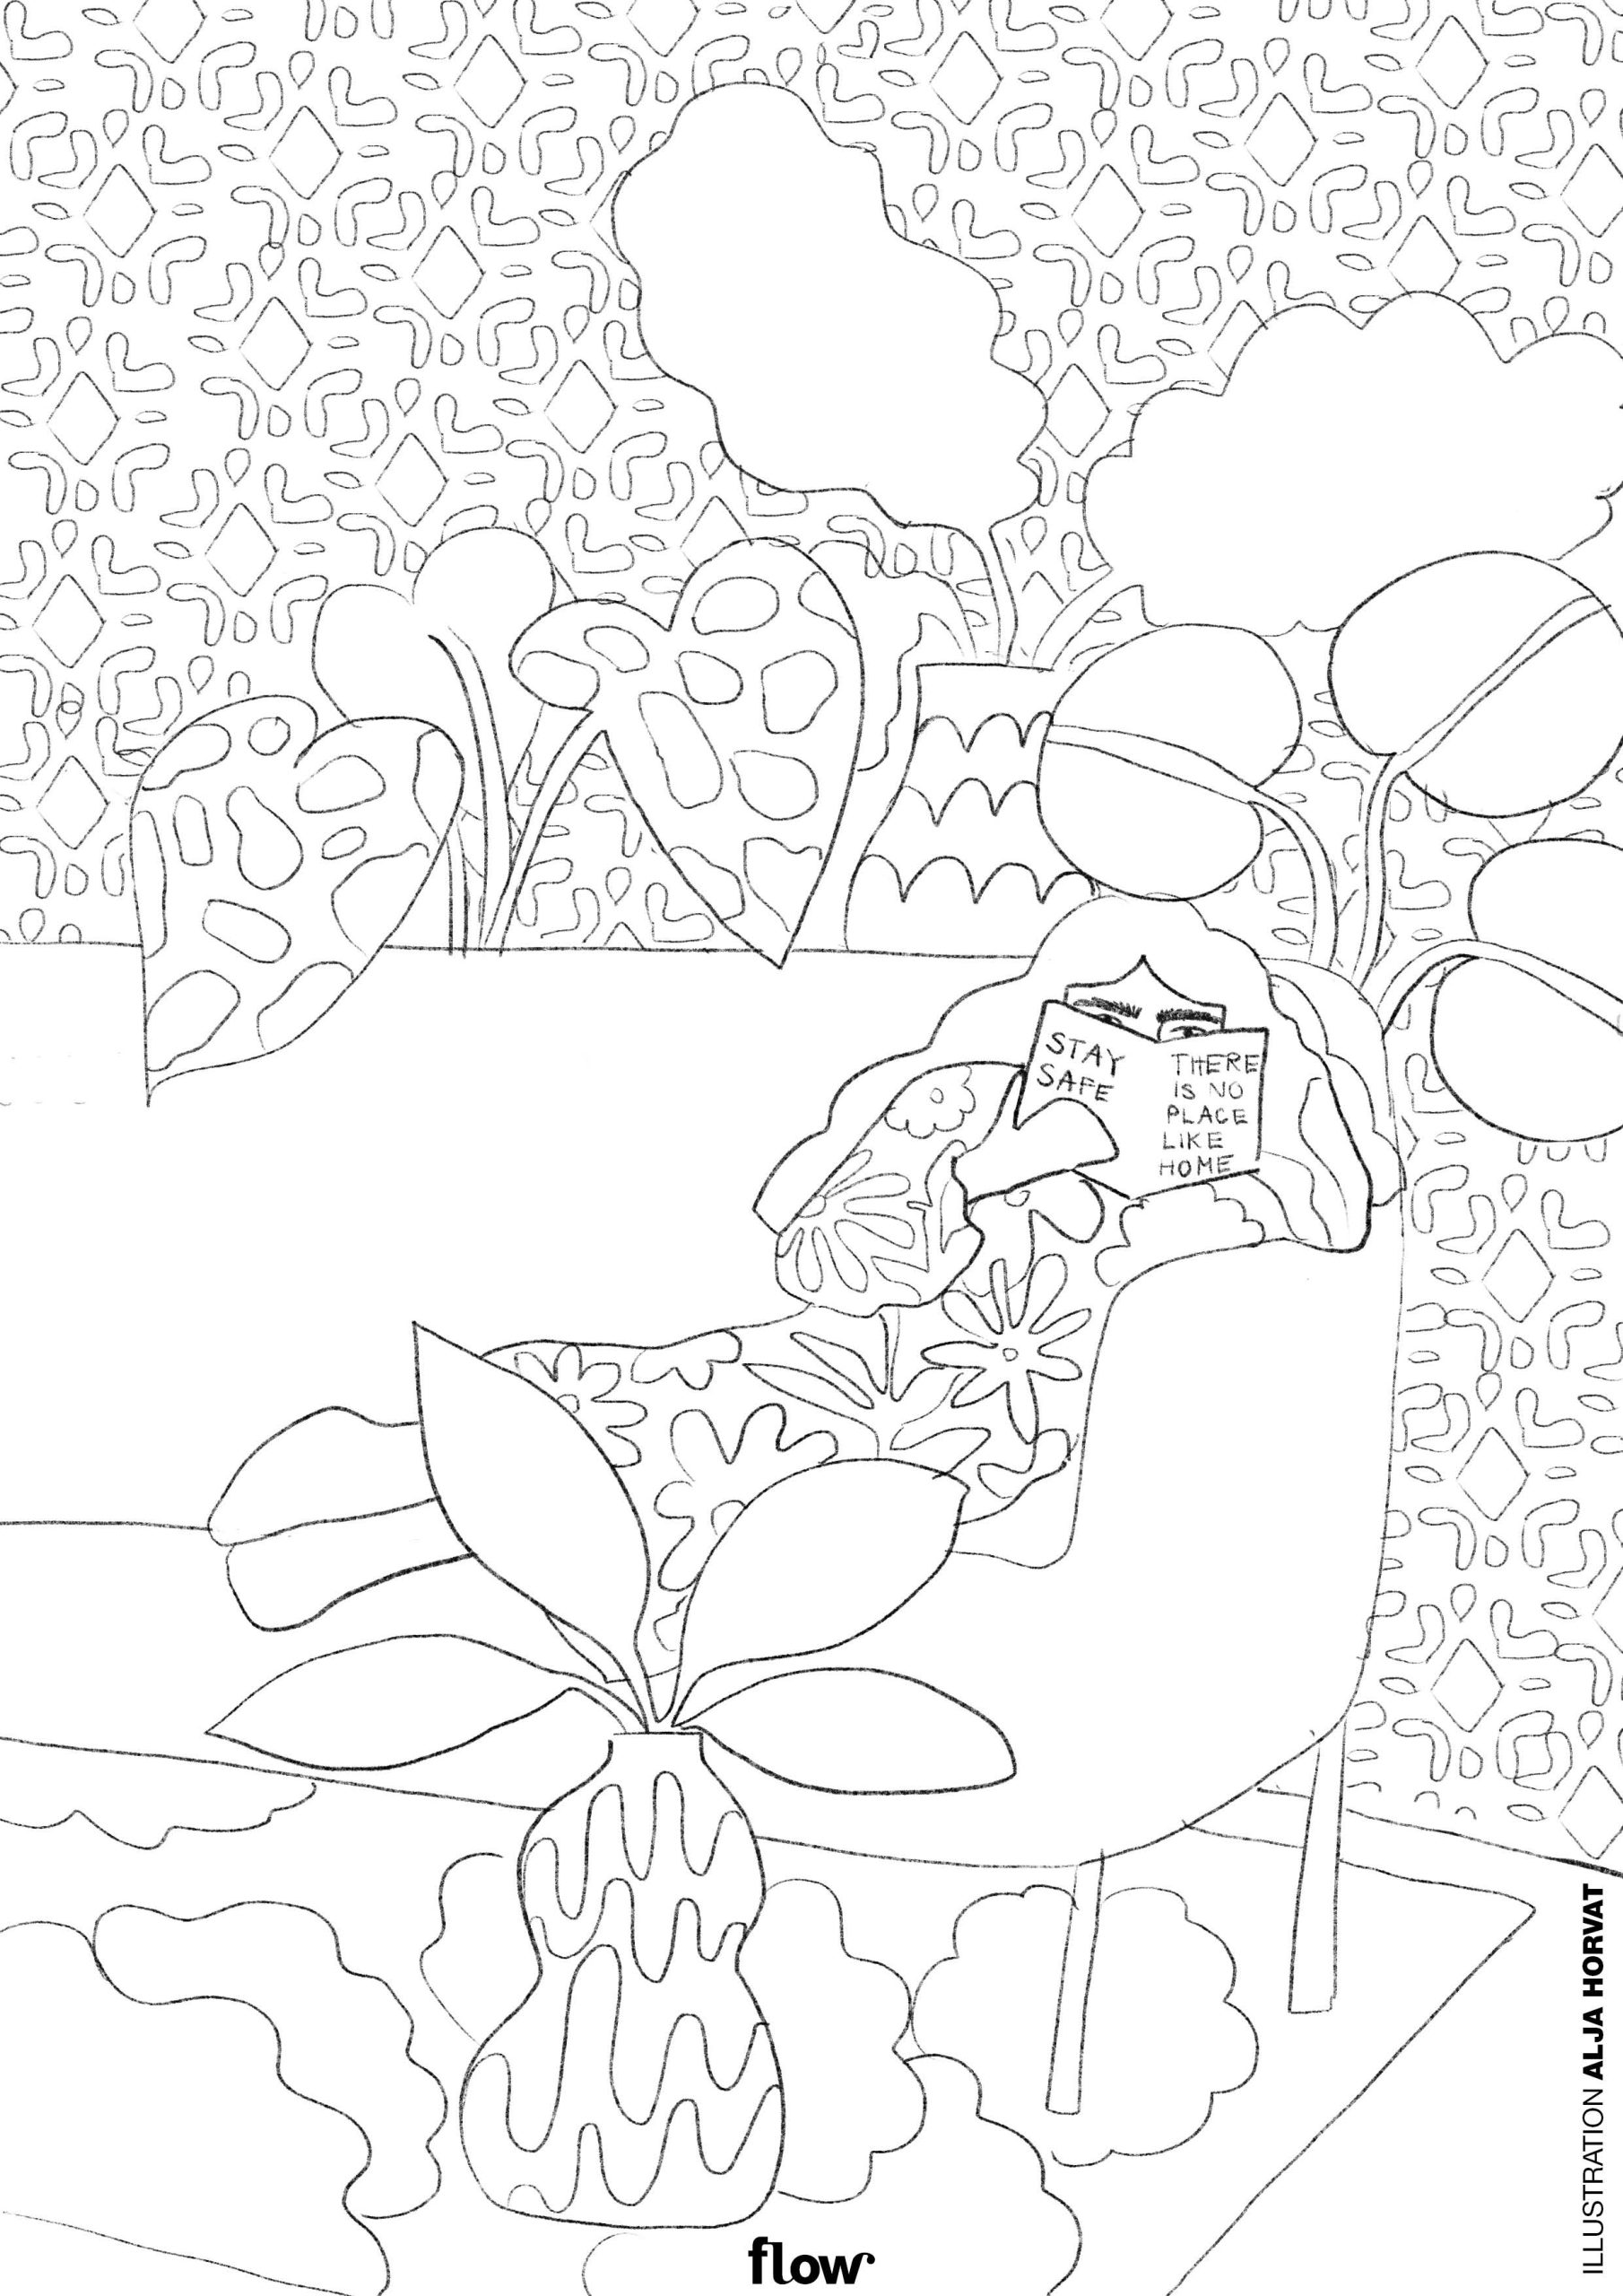 Comforting coloring page: No place like home - Flow Magazine - en